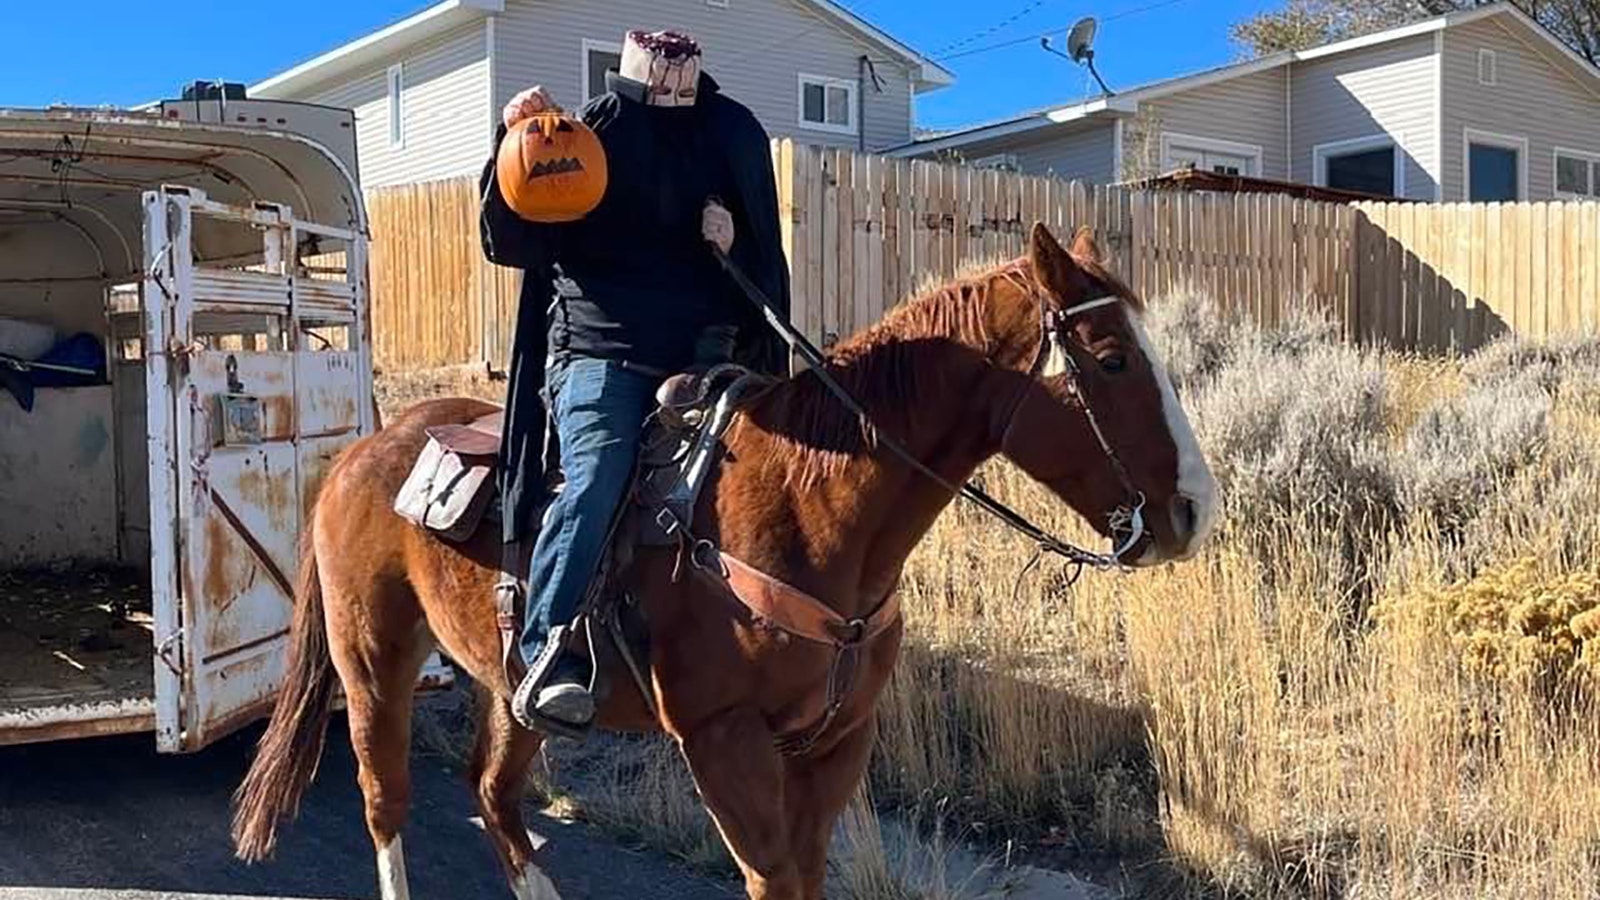 For the second year in a row, Colton Kraft rode through Green River as the Headless Horseman on his trusty horse Spudley on Tuesday. Most kids weren't afraid of him, though, as he hands out candy.